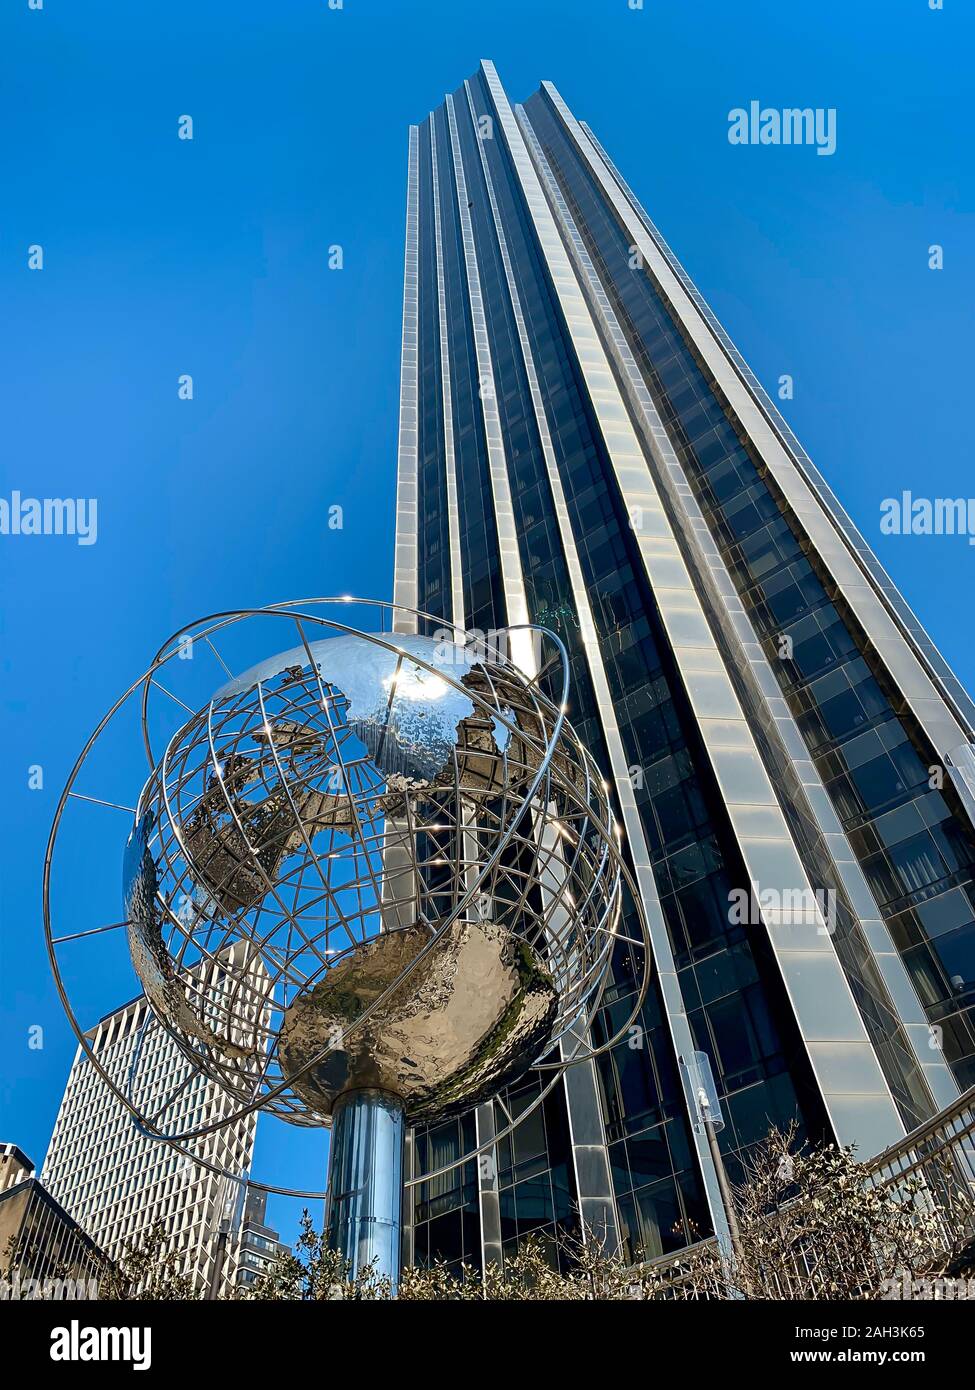 NEW YORK, USA. APR 2019: Globe Sculpture and building view at Columbus ...